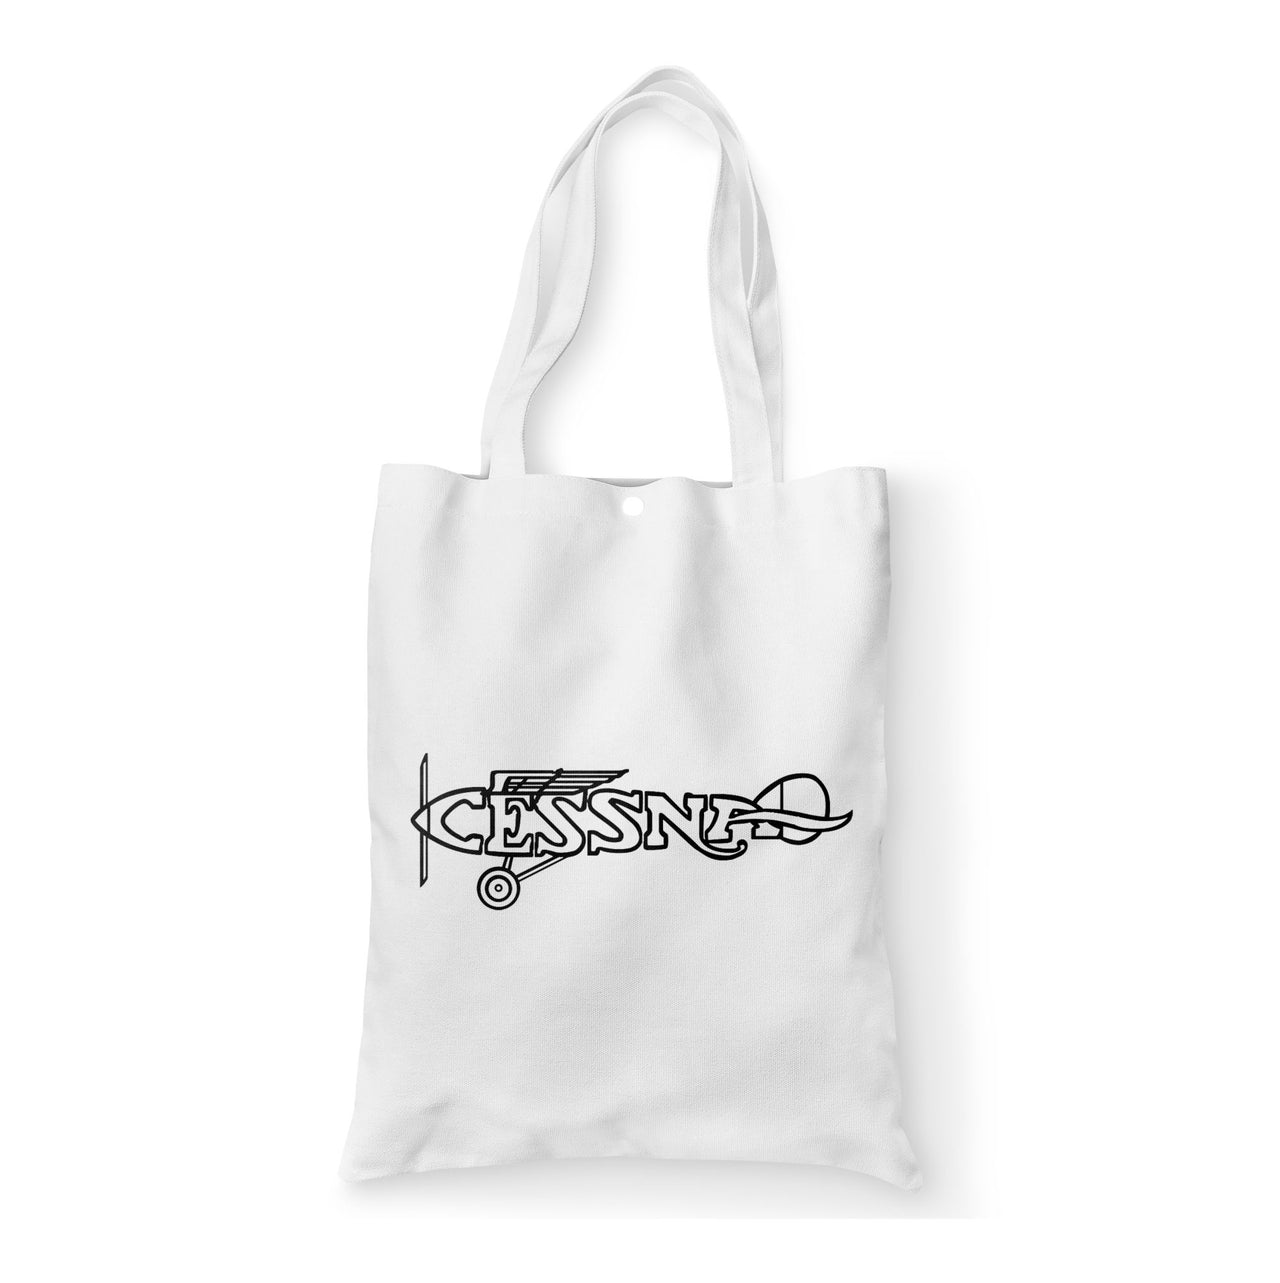 Special Cessna Text Designed Tote Bags